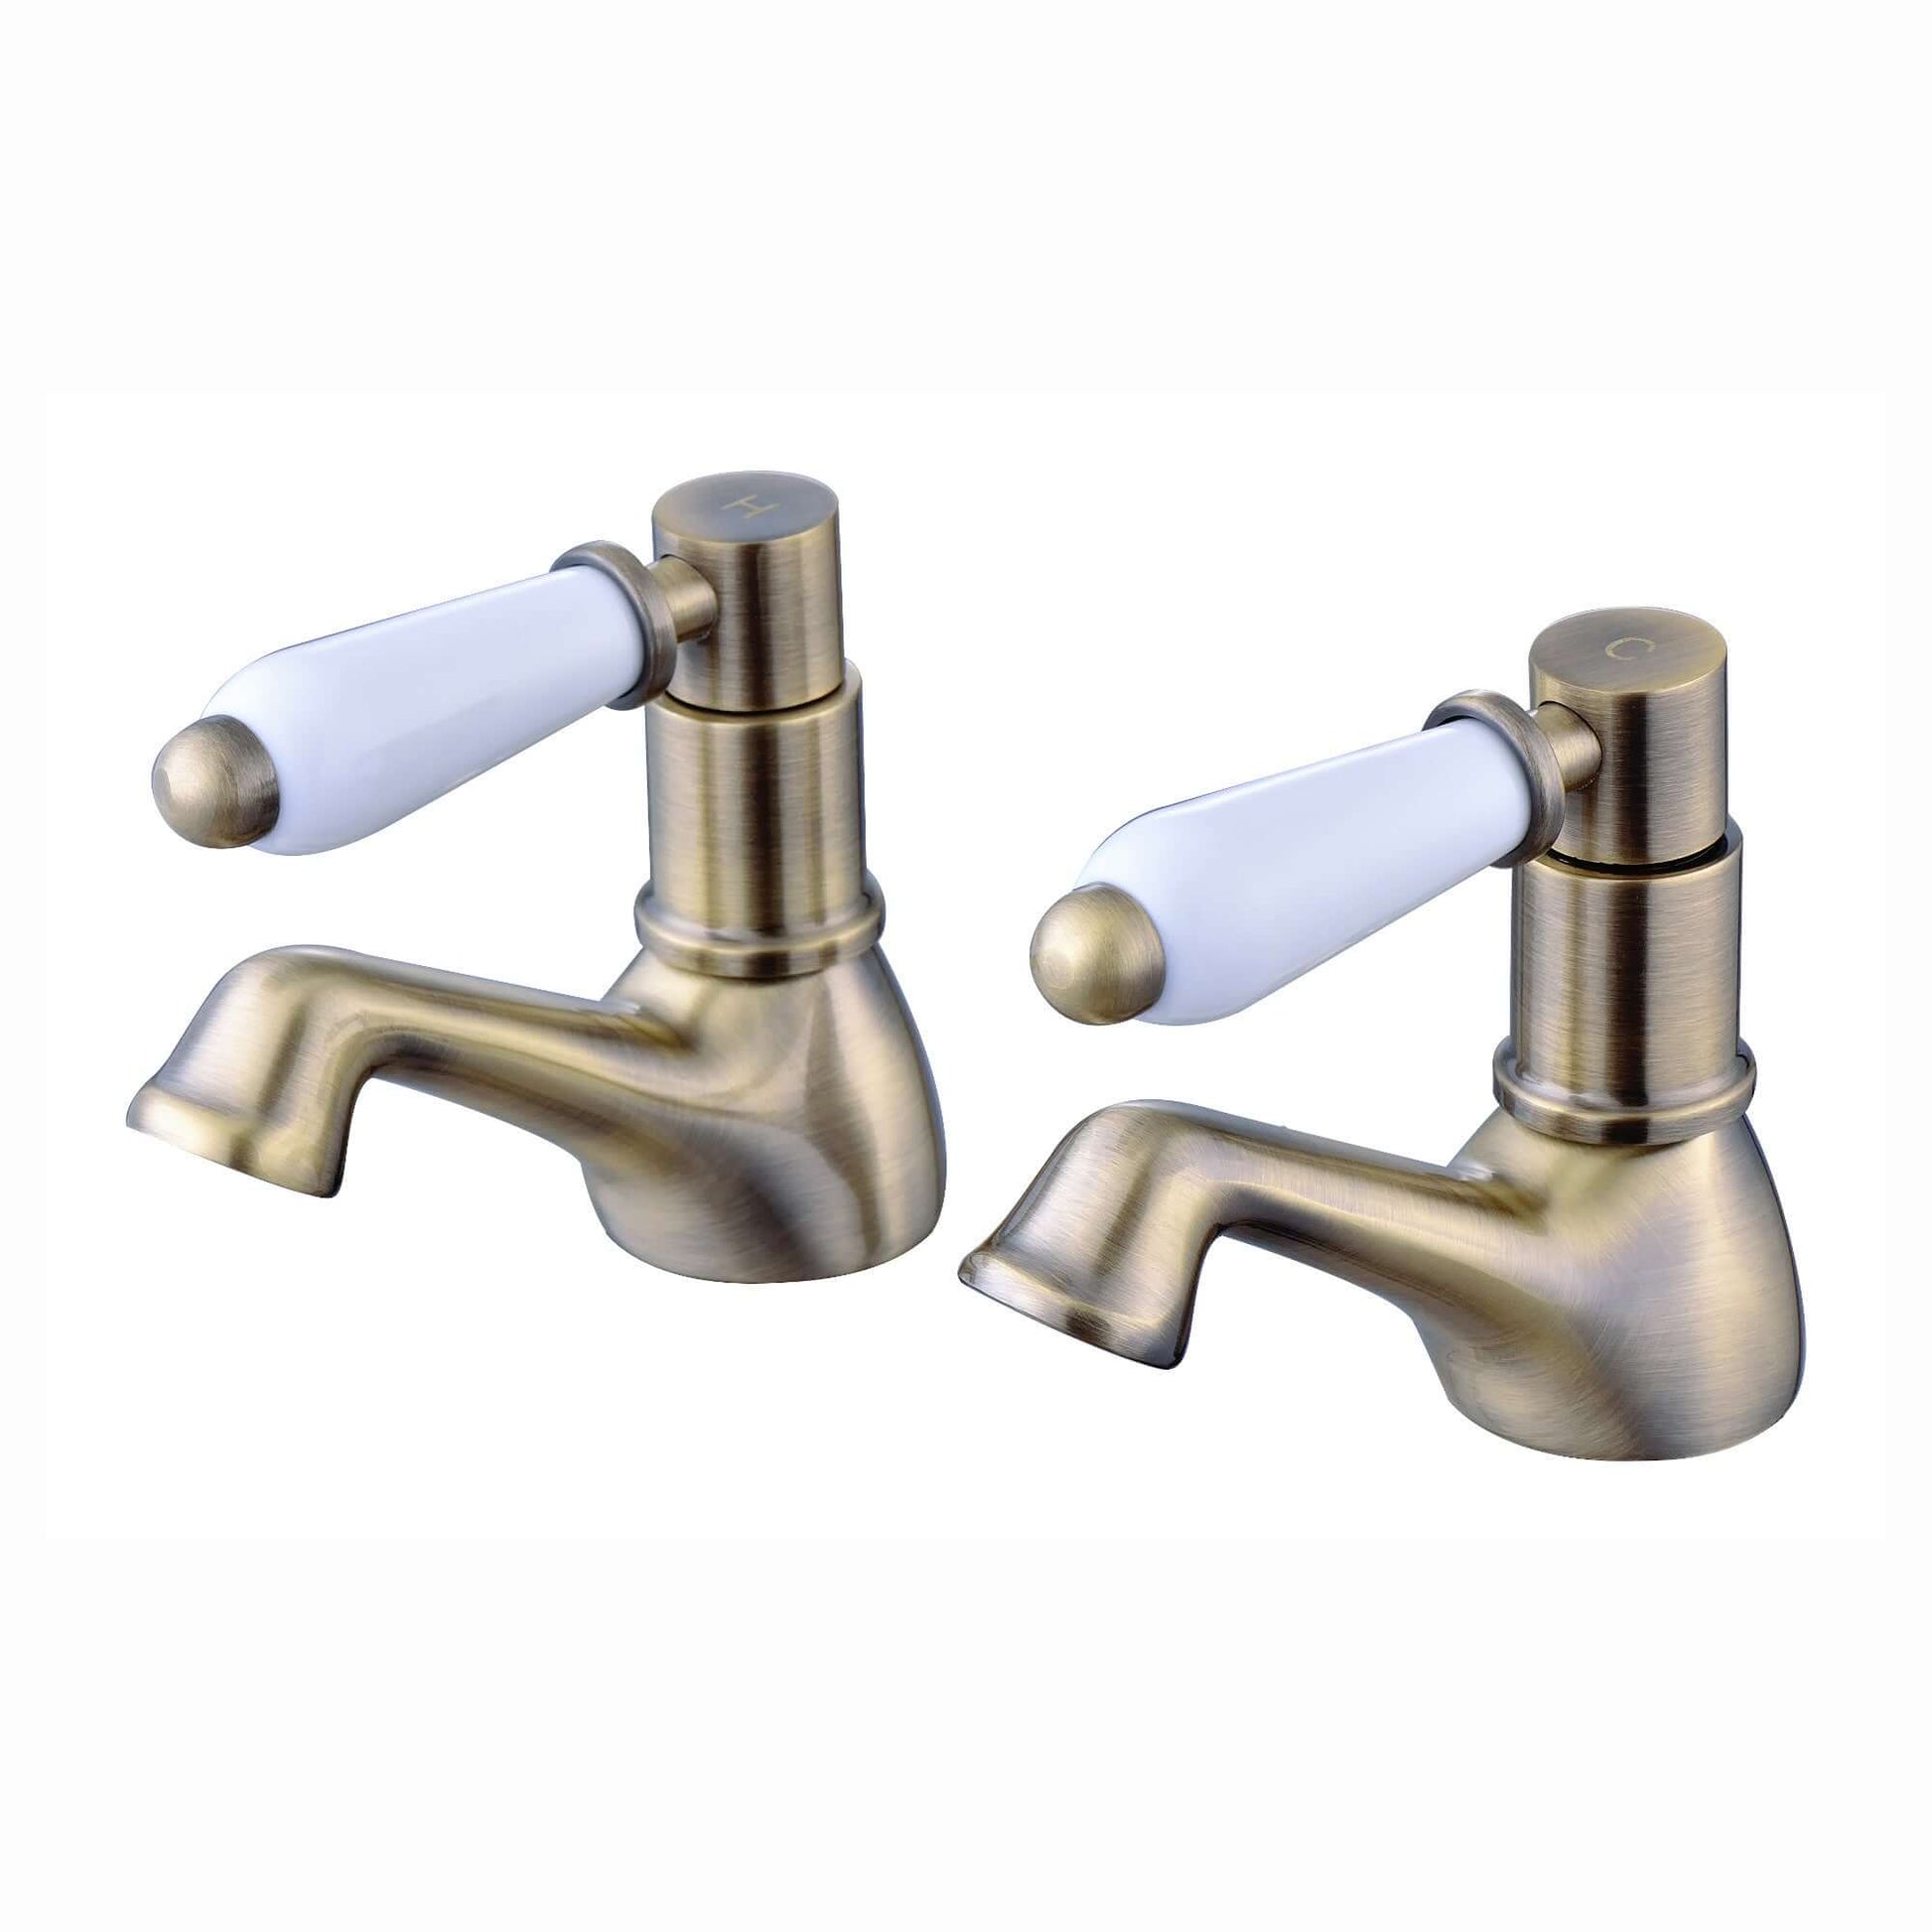 Downton hot and cold bath taps with white ceramic levers - antique bronze - Taps